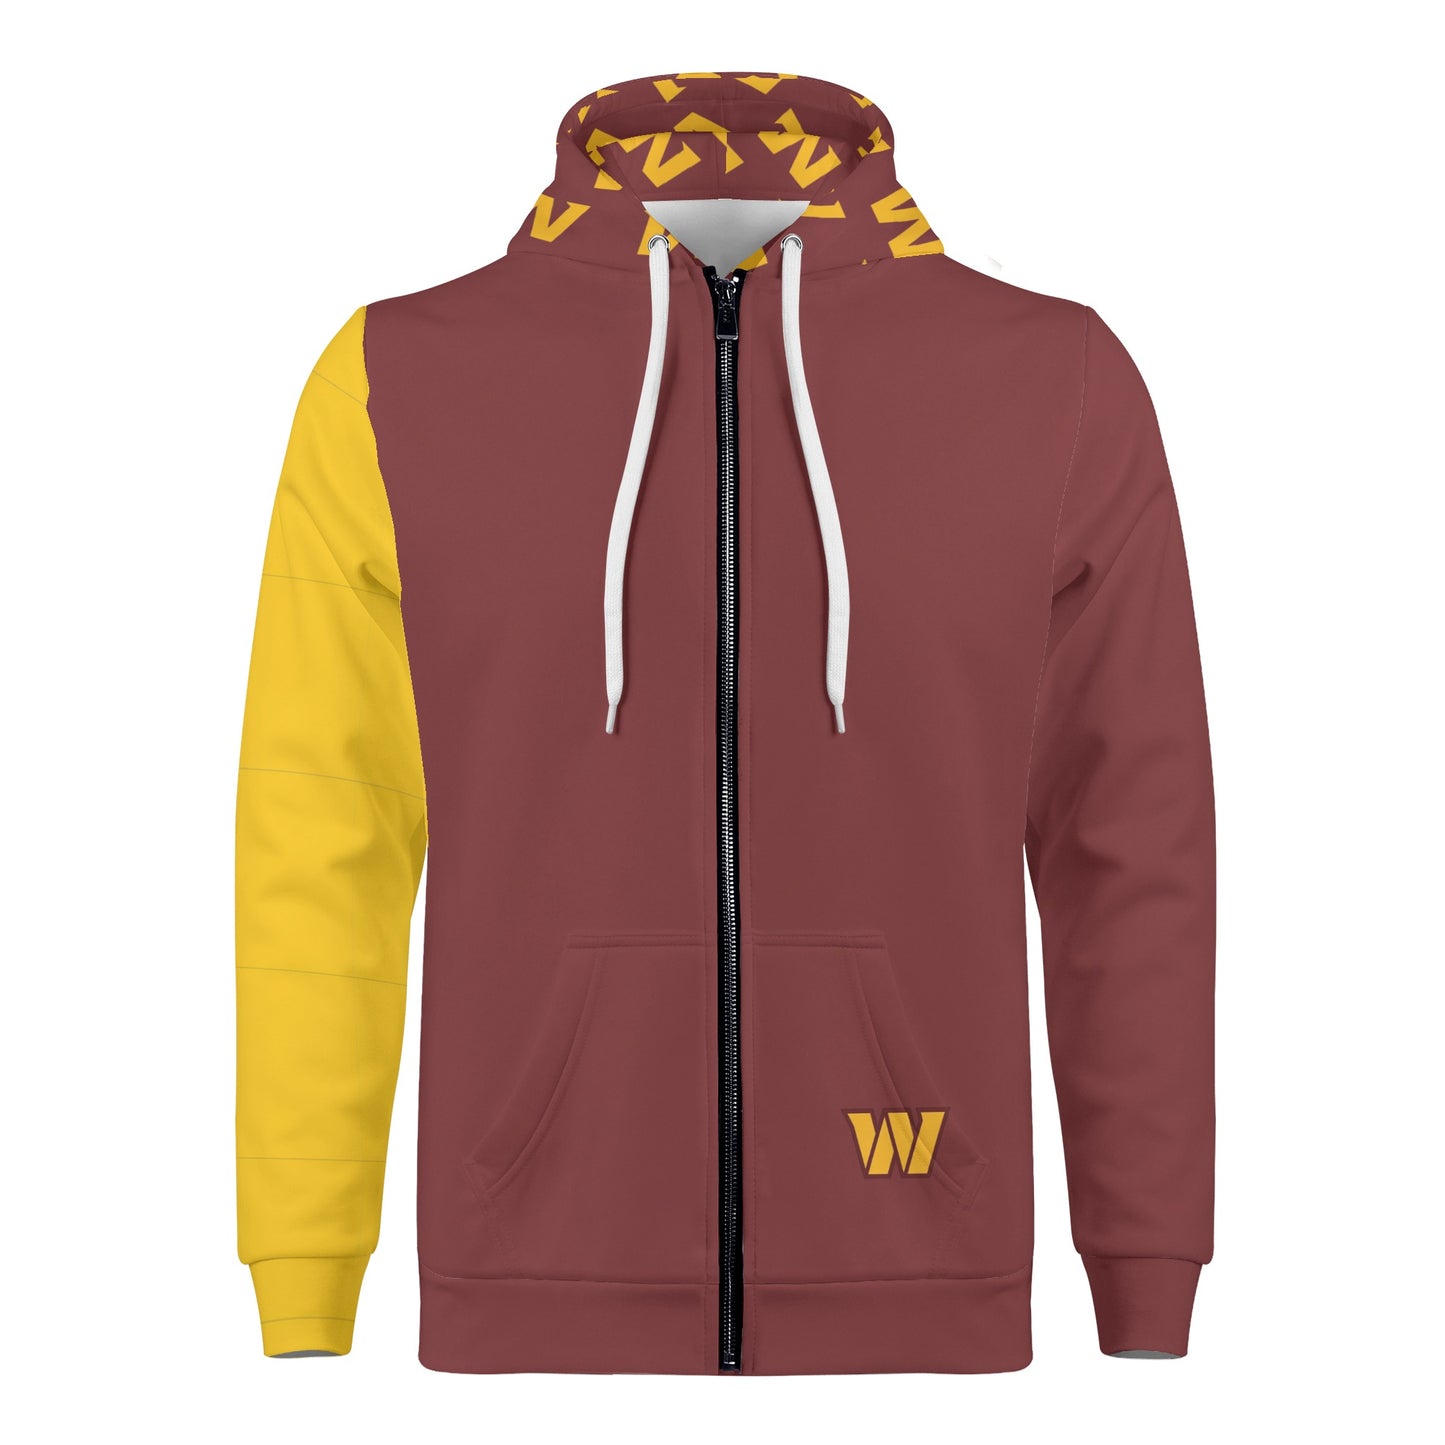 T4x Mens Burgandy and Gold Zip Up Hoodie